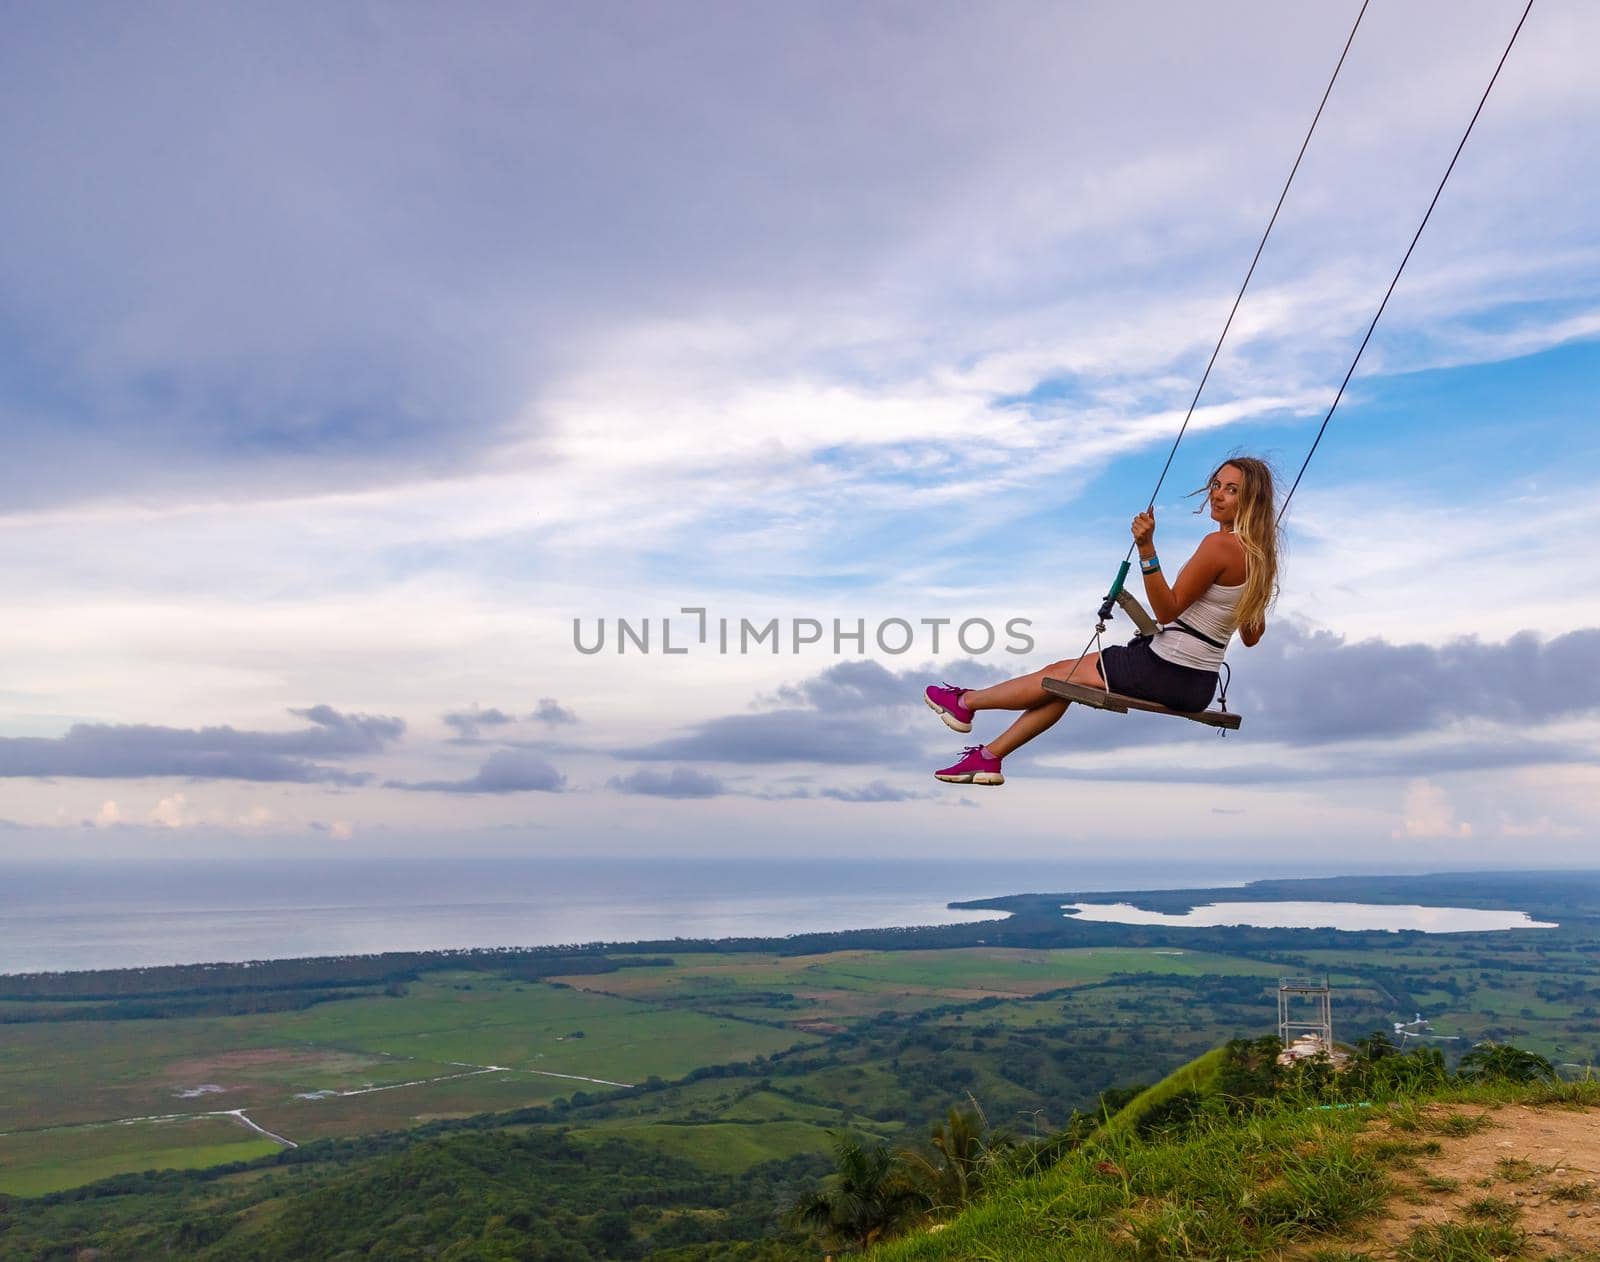 A young girl, blonde, swinging on a swing on a mountain slope in summer. by Yurich32